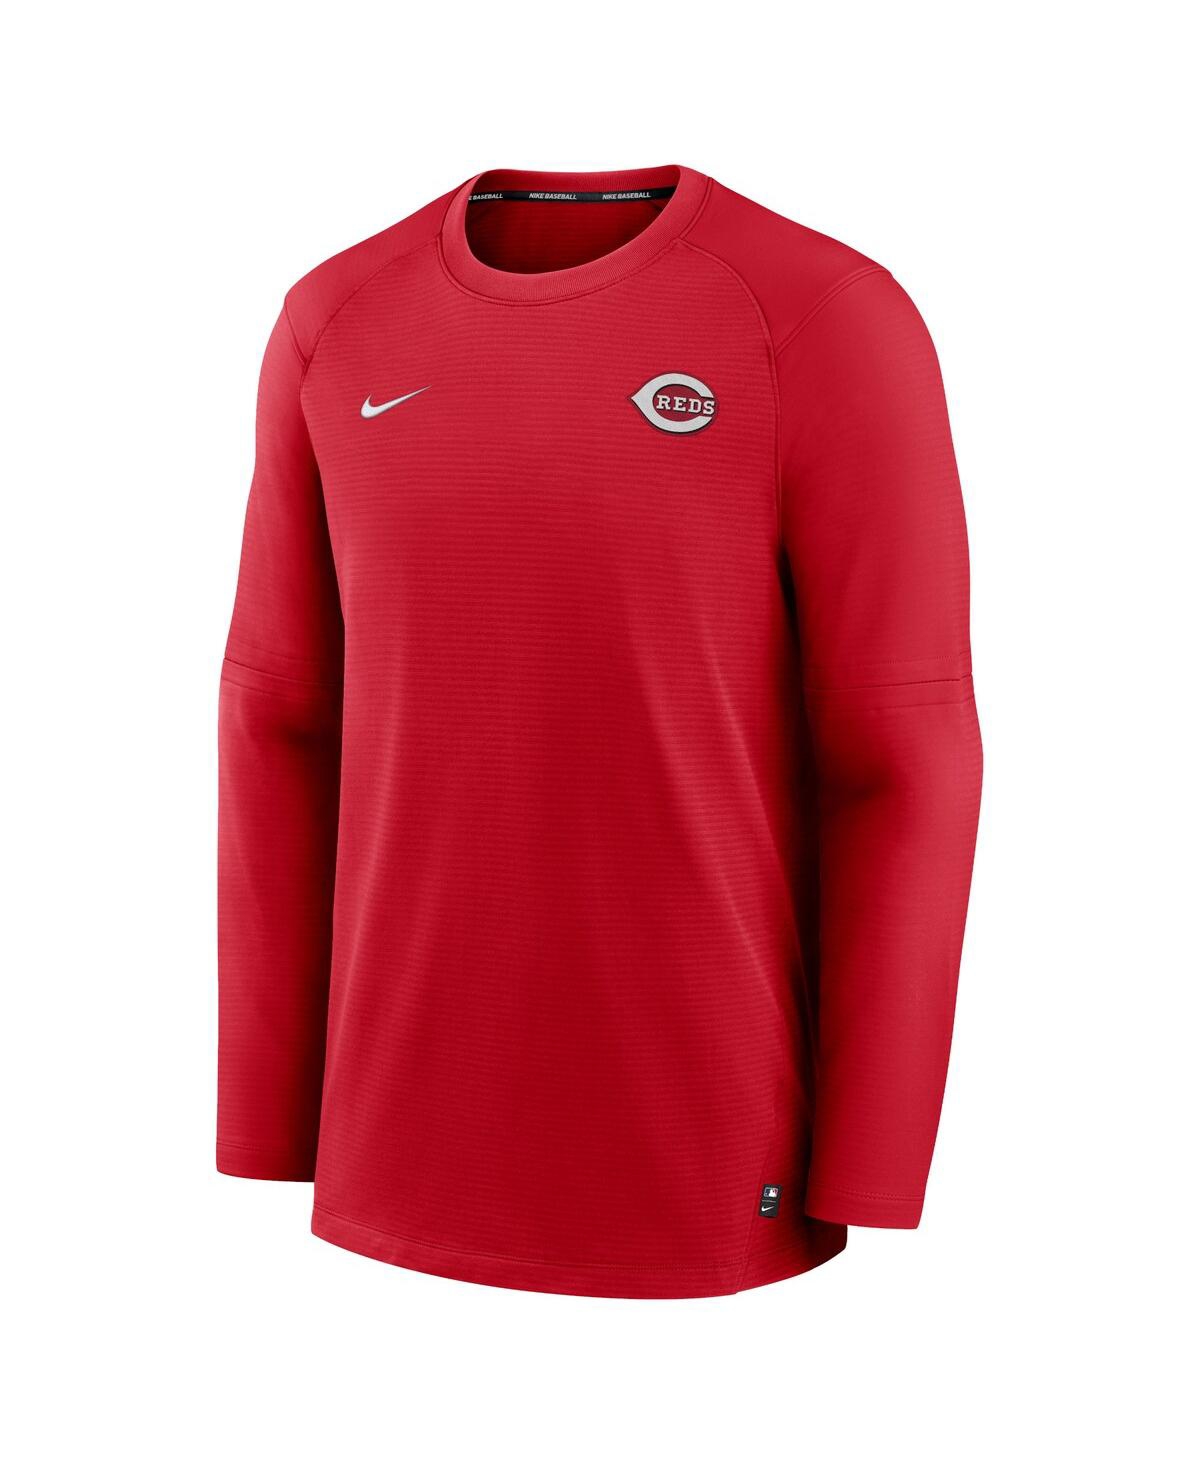 Shop Nike Men's  Red Cincinnati Reds Authentic Collection Logo Performance Long Sleeve T-shirt